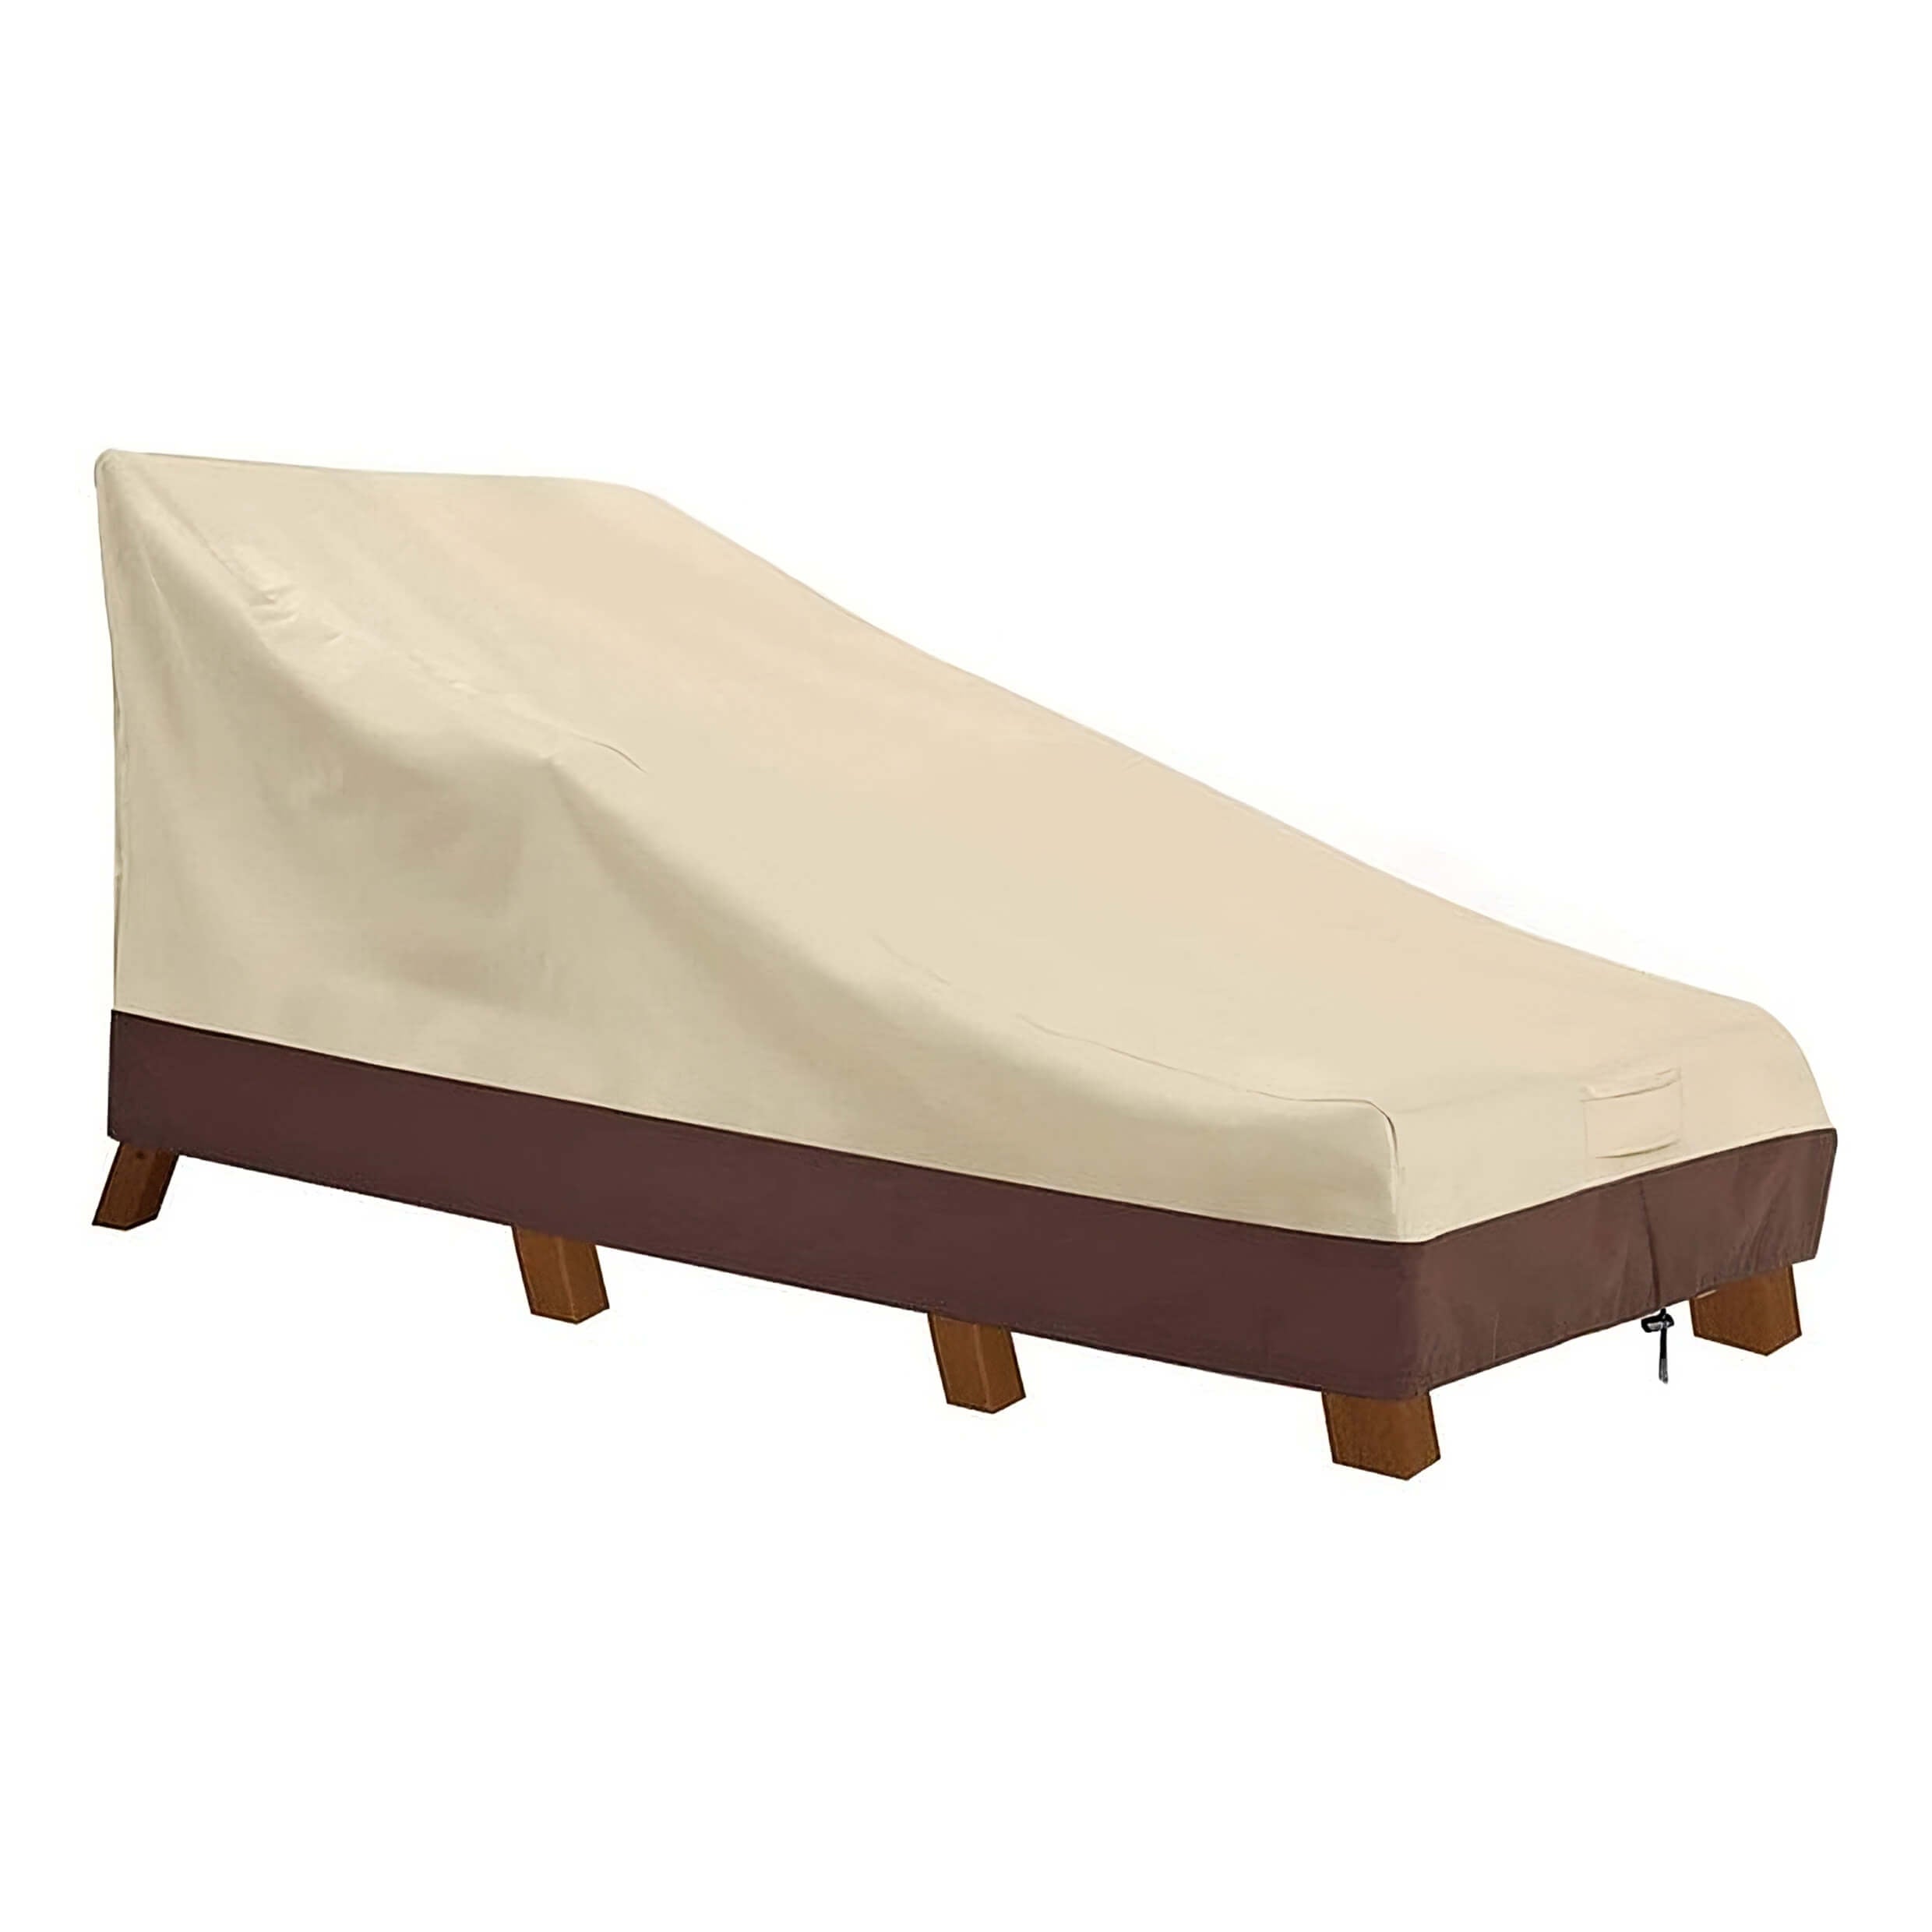 Outdoor Waterproof Patio Chaise Lounge Cover